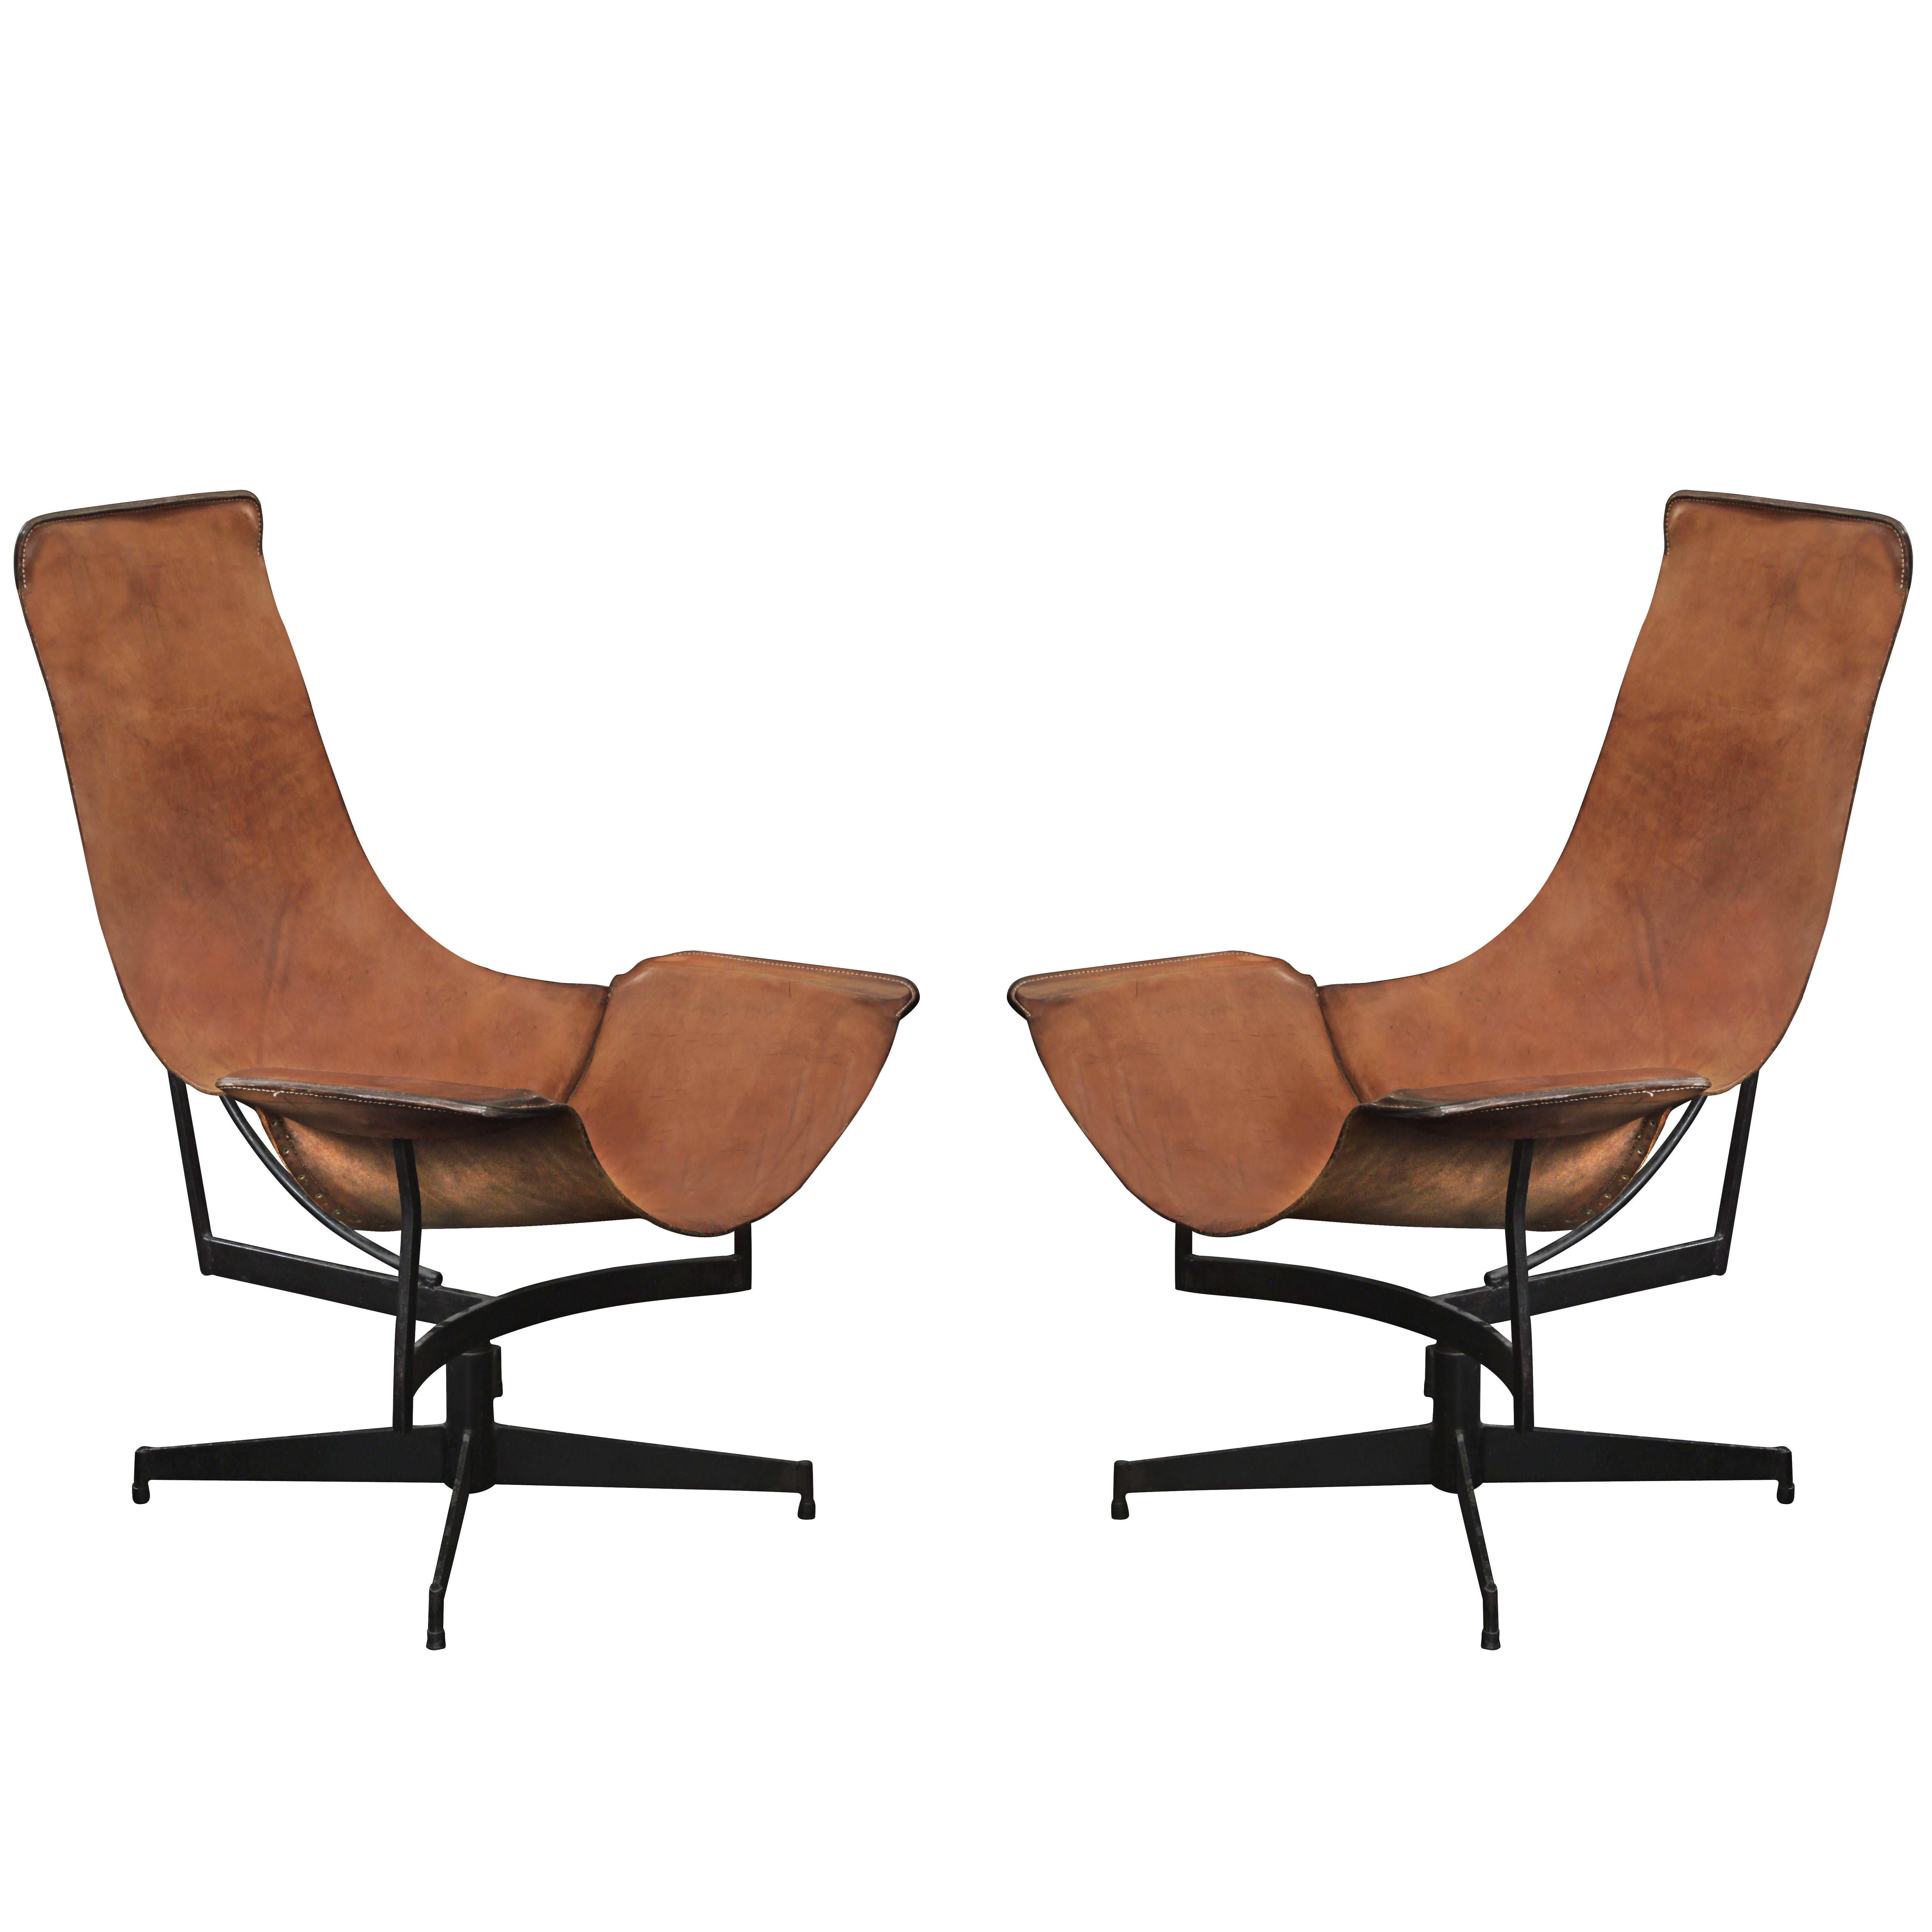 Pair of Swivelling Sling Chairs by William Katavolos